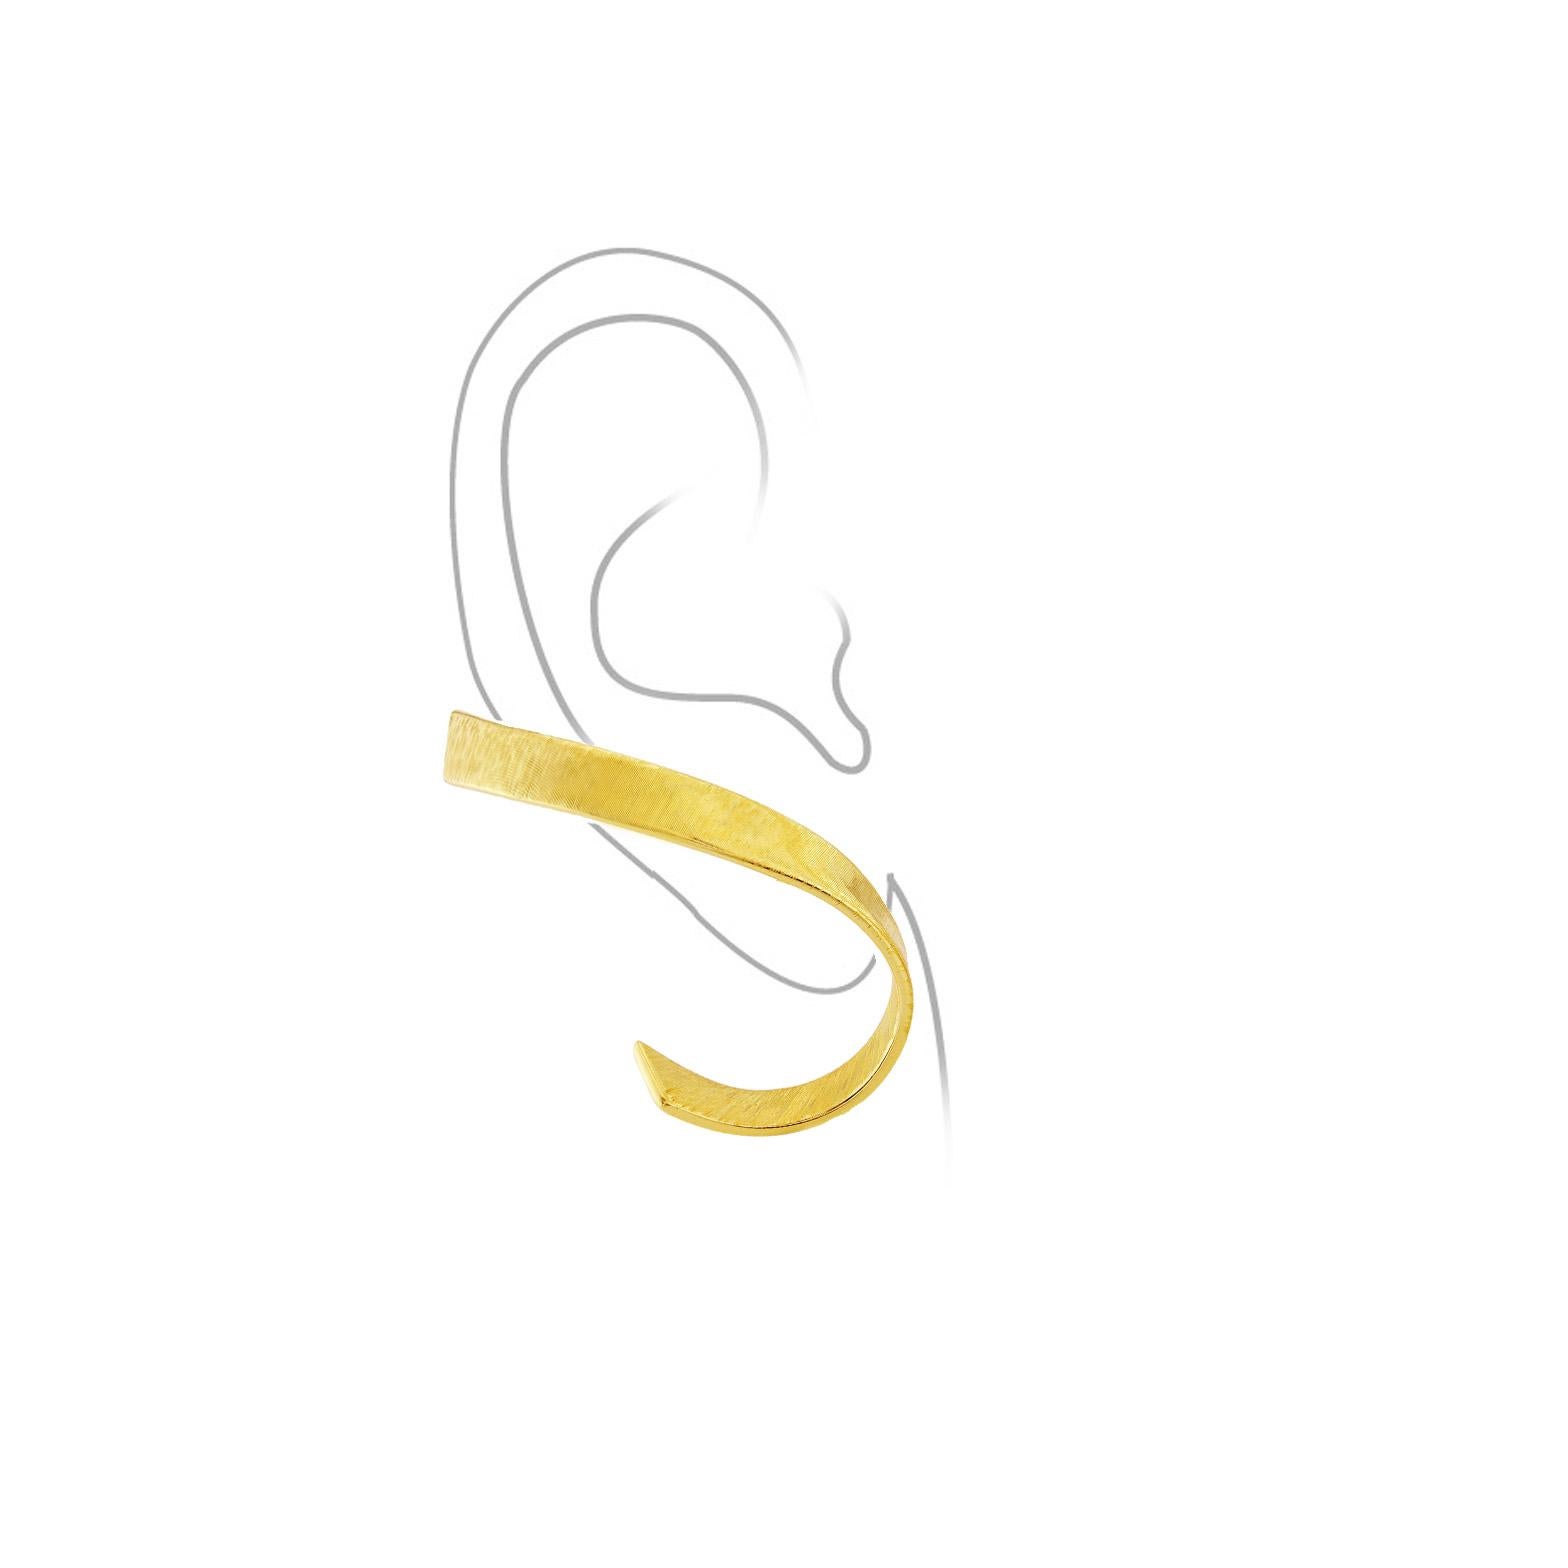 This simple organic design makes a classic shape that curls around the ear.
 
Following the natural shape of the ear from pierced ear lobe, it is intriguingly held in place at the top with a clip developed for maximum comfort.
 
The silken effect is